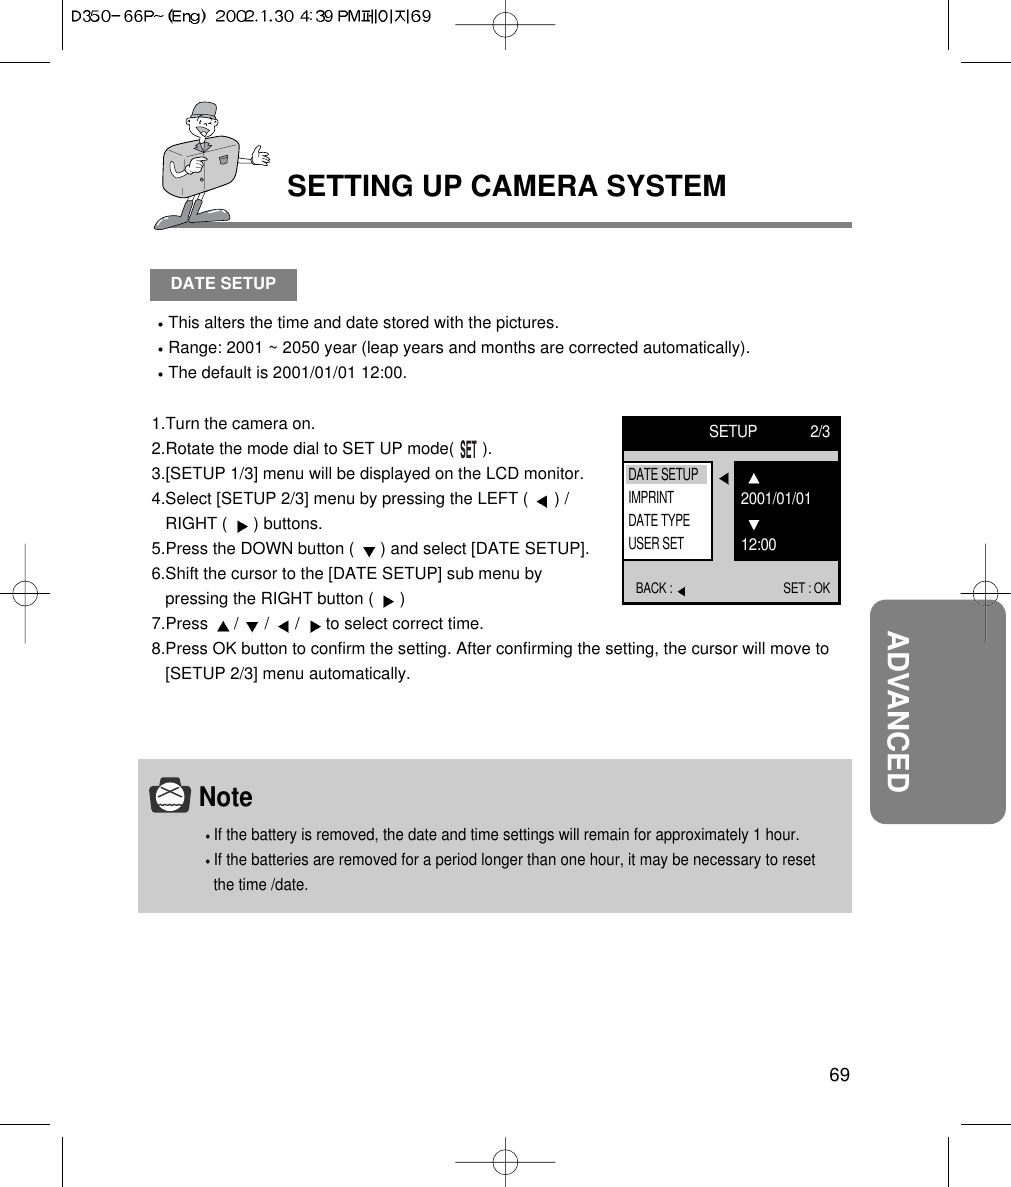 69ADVANCEDSETTING UP CAMERA SYSTEMDATE SETUPThis alters the time and date stored with the pictures.Range: 2001 ~ 2050 year (leap years and months are corrected automatically).The default is 2001/01/01 12:00.1.Turn the camera on.2.Rotate the mode dial to SET UP mode(      ).3.[SETUP 1/3] menu will be displayed on the LCD monitor.4.Select [SETUP 2/3] menu by pressing the LEFT (  ) /RIGHT (  ) buttons.5.Press the DOWN button (  ) and select [DATE SETUP].6.Shift the cursor to the [DATE SETUP] sub menu bypressing the RIGHT button (  ) 7.Press  /  /  /  to select correct time.8.Press OK button to confirm the setting. After confirming the setting, the cursor will move to[SETUP 2/3] menu automatically.SETUP 2/3BACK :  SET : OK2001/01/0112:00DATE SETUPIMPRINTDATE TYPEUSER SETNoteIf the battery is removed, the date and time settings will remain for approximately 1 hour.If the batteries are removed for a period longer than one hour, it may be necessary to resetthe time /date.